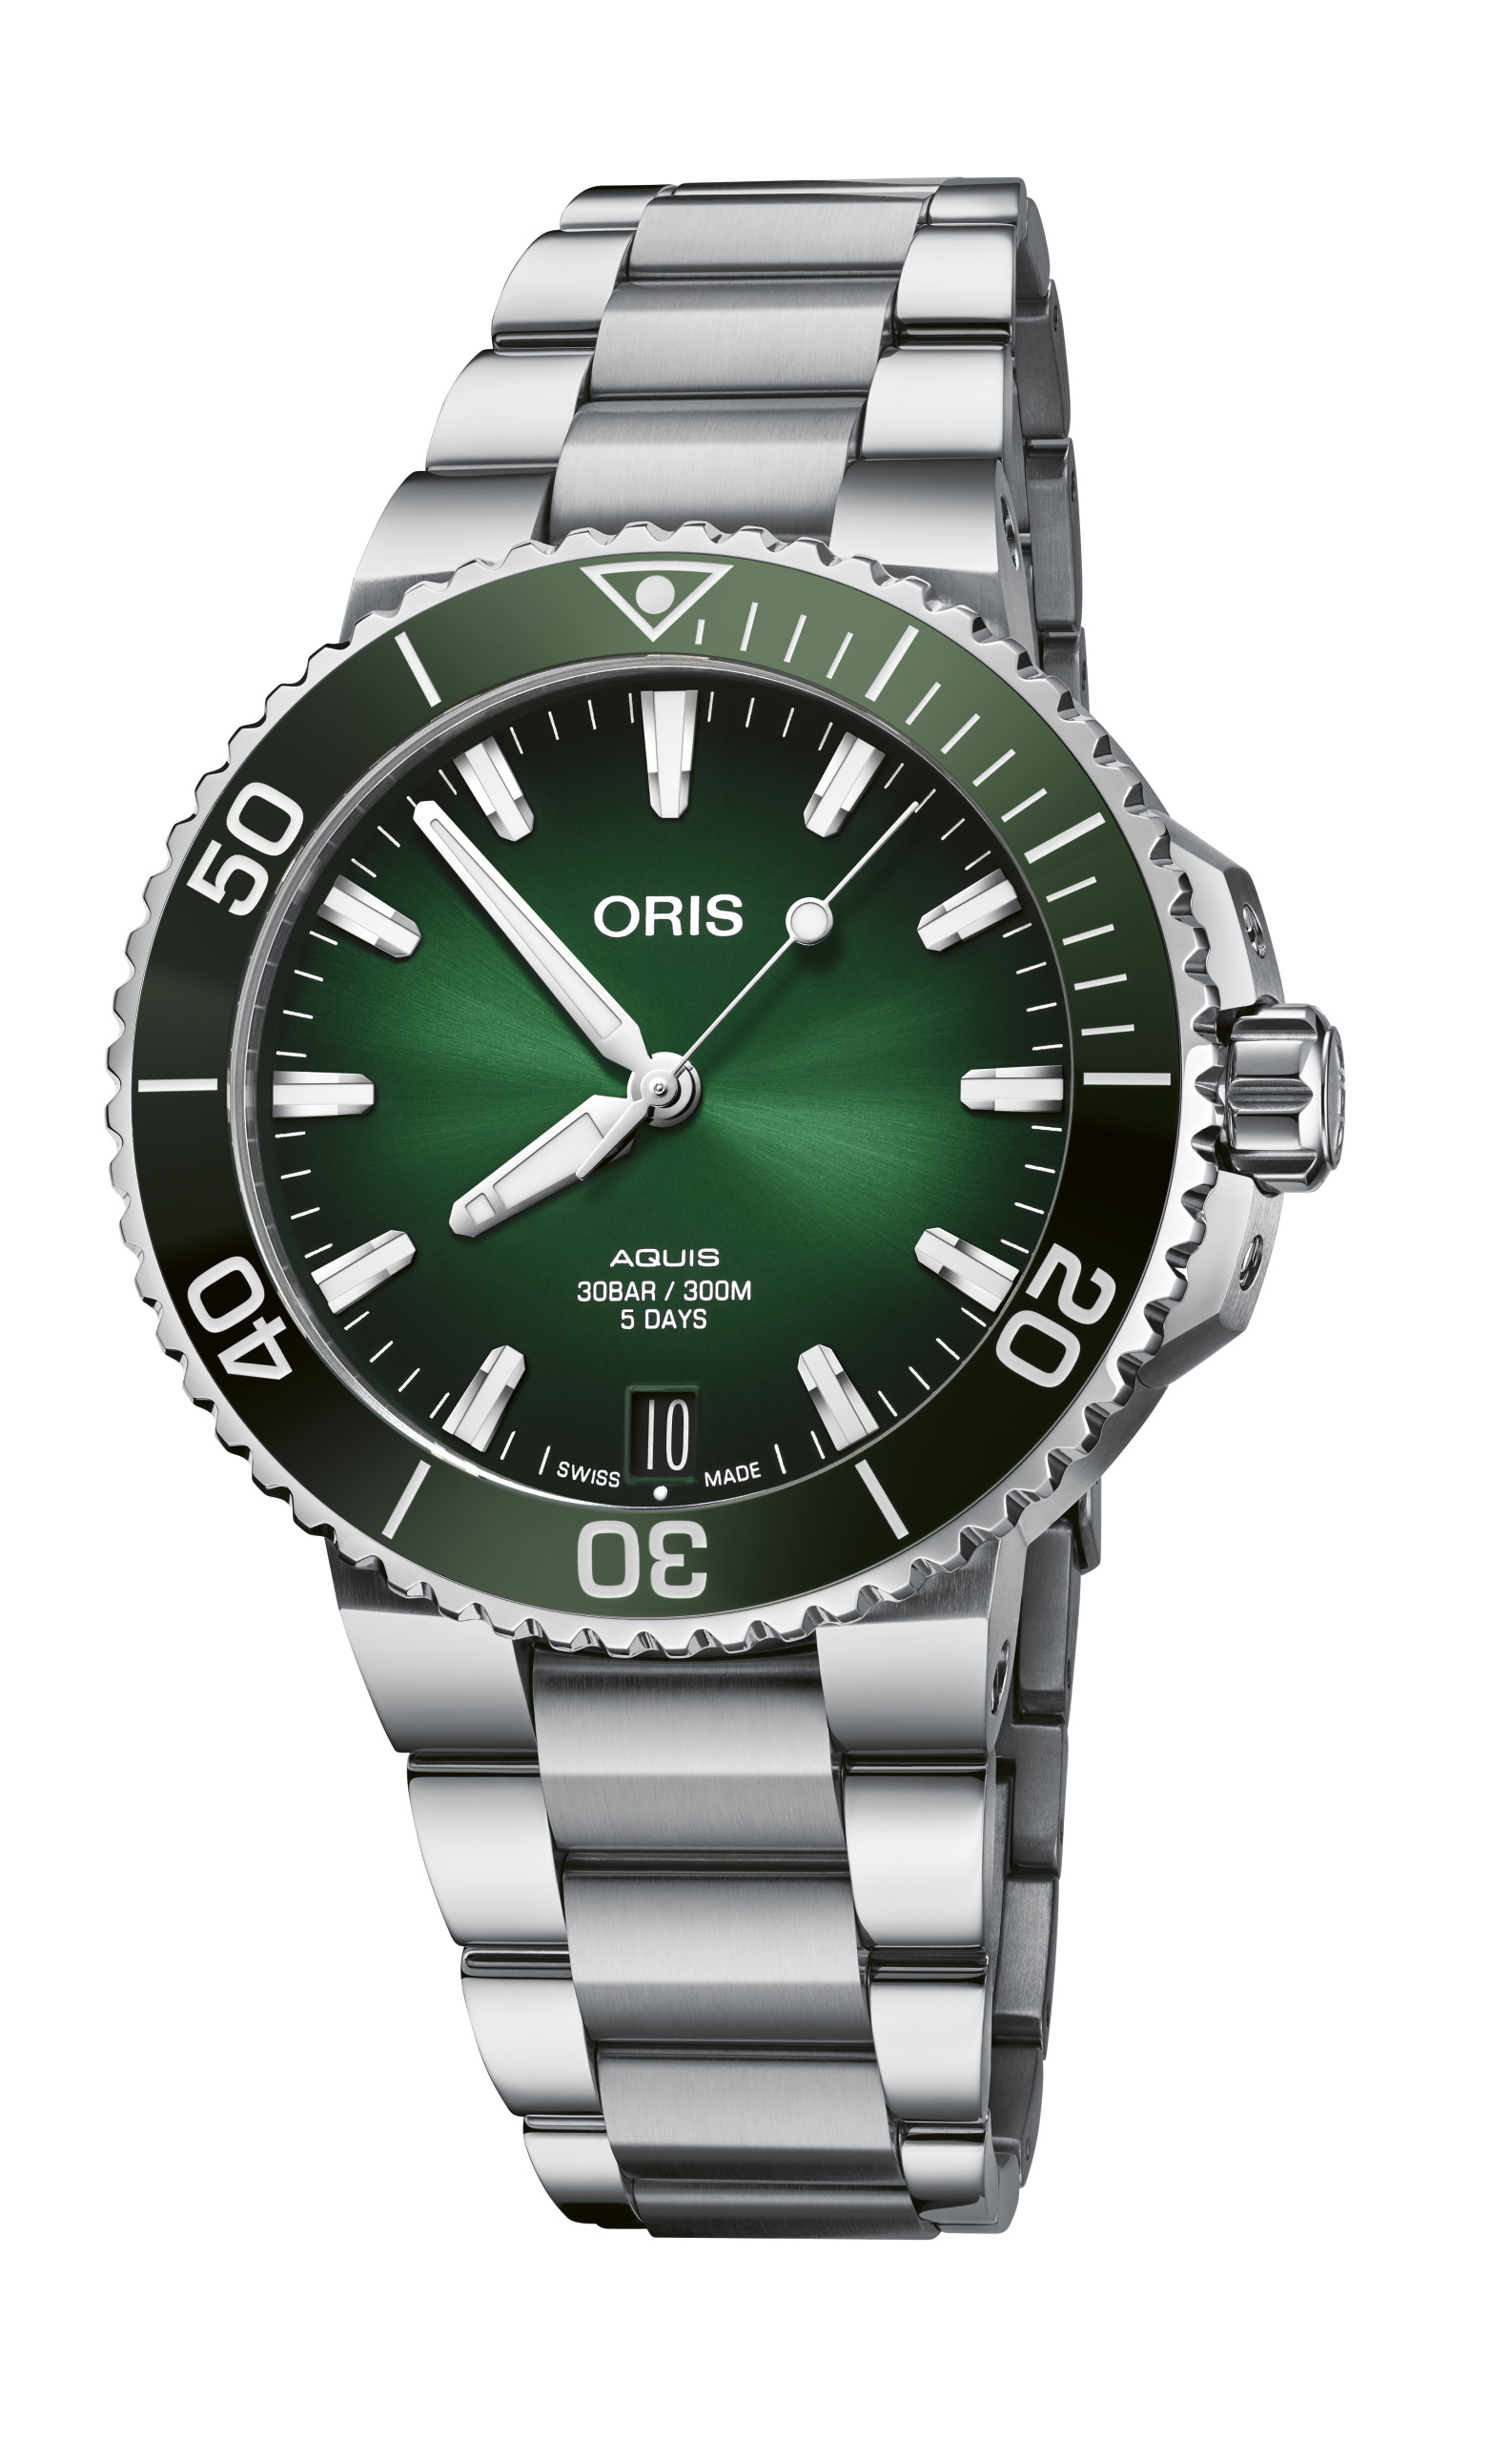 Oris Aquis Date Stainless Steel Green Dial Watch Image